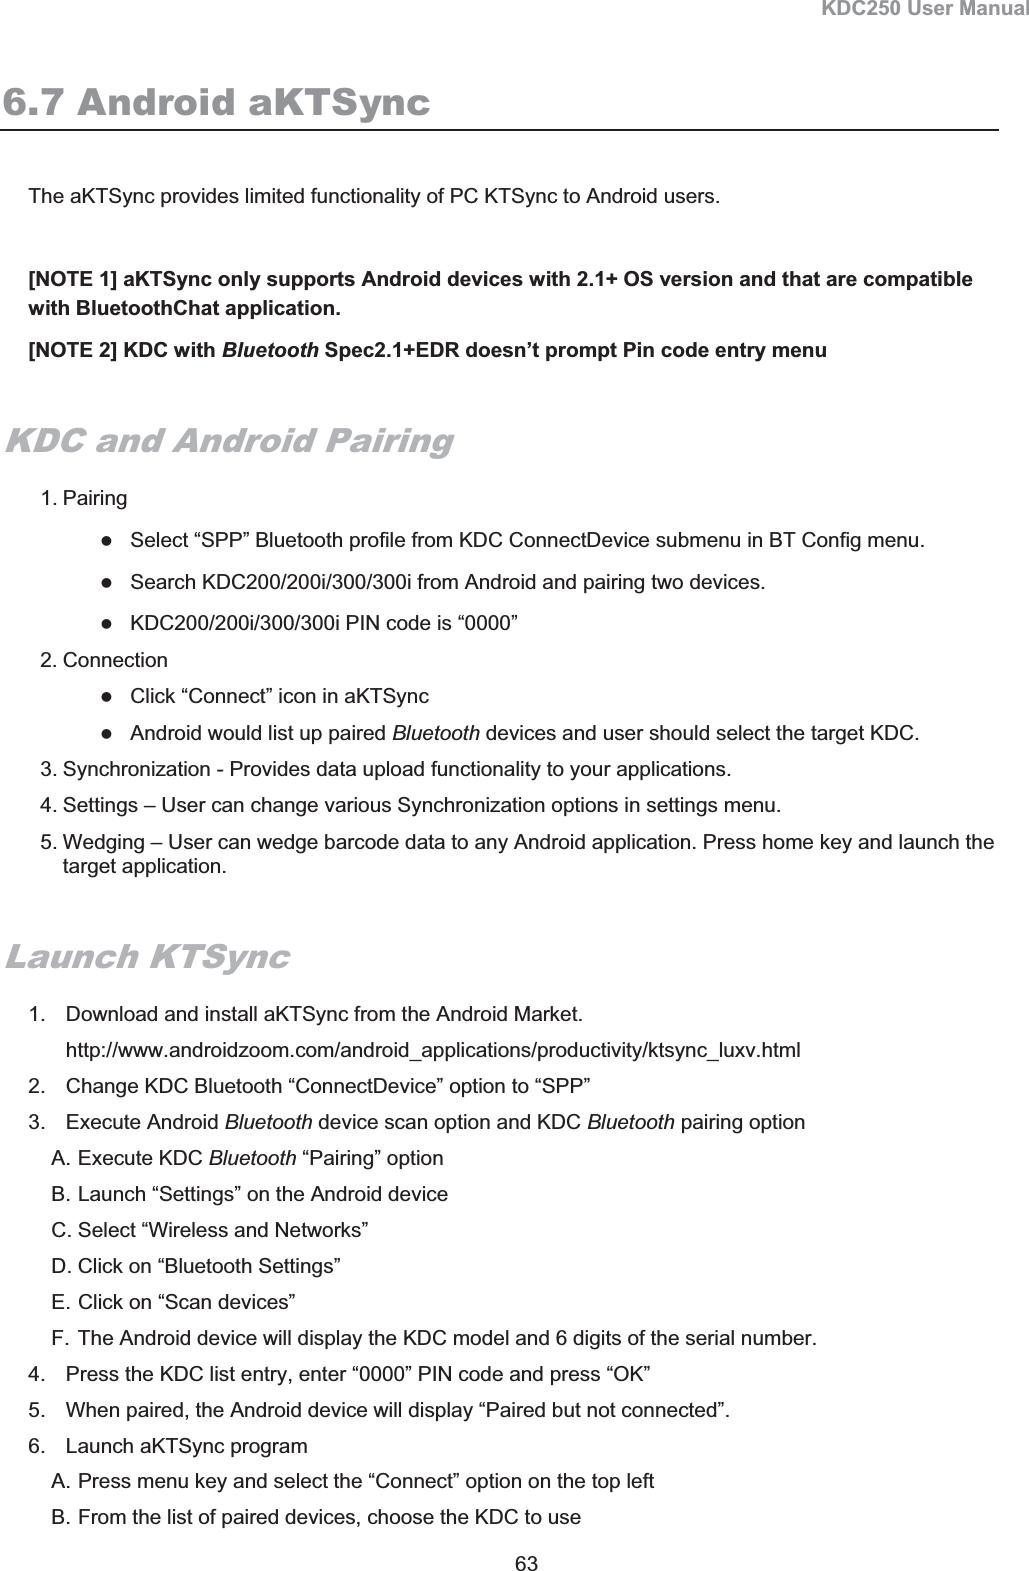 KDC250 User Manual 63 6.7 Android aKTSync The aKTSync provides limited functionality of PC KTSync to Android users.  [NOTE 1] aKTSync only supports Android devices with 2.1+ OS version and that are compatible with BluetoothChat application.  [NOTE 2] KDC with Bluetooth Spec2.1+EDR doesn’t prompt Pin code entry menu KDC and Android Pairing 1. Pairing zSelect “SPP” Bluetooth profile from KDC ConnectDevice submenu in BT Config menu. zSearch KDC200/200i/300/300i from Android and pairing two devices. zKDC200/200i/300/300i PIN code is “0000” 2. Connection zClick “Connect” icon in aKTSync zAndroid would list up paired Bluetooth devices and user should select the target KDC. 3. Synchronization - Provides data upload functionality to your applications. 4. Settings – User can change various Synchronization options in settings menu. 5. Wedging – User can wedge barcode data to any Android application. Press home key and launch the target application.  Launch KTSync 1.  Download and install aKTSync from the Android Market. http://www.androidzoom.com/android_applications/productivity/ktsync_luxv.html 2.  Change KDC Bluetooth “ConnectDevice” option to “SPP” 3. Execute Android Bluetooth device scan option and KDC Bluetooth pairing option A. Execute KDC Bluetooth “Pairing” option  B. Launch “Settings” on the Android device C. Select “Wireless and Networks” D. Click on “Bluetooth Settings” E. Click on “Scan devices” F. The Android device will display the KDC model and 6 digits of the serial number.  4.  Press the KDC list entry, enter “0000” PIN code and press “OK” 5.  When paired, the Android device will display “Paired but not connected”. 6.  Launch aKTSync program  A. Press menu key and select the “Connect” option on the top left B. From the list of paired devices, choose the KDC to use 